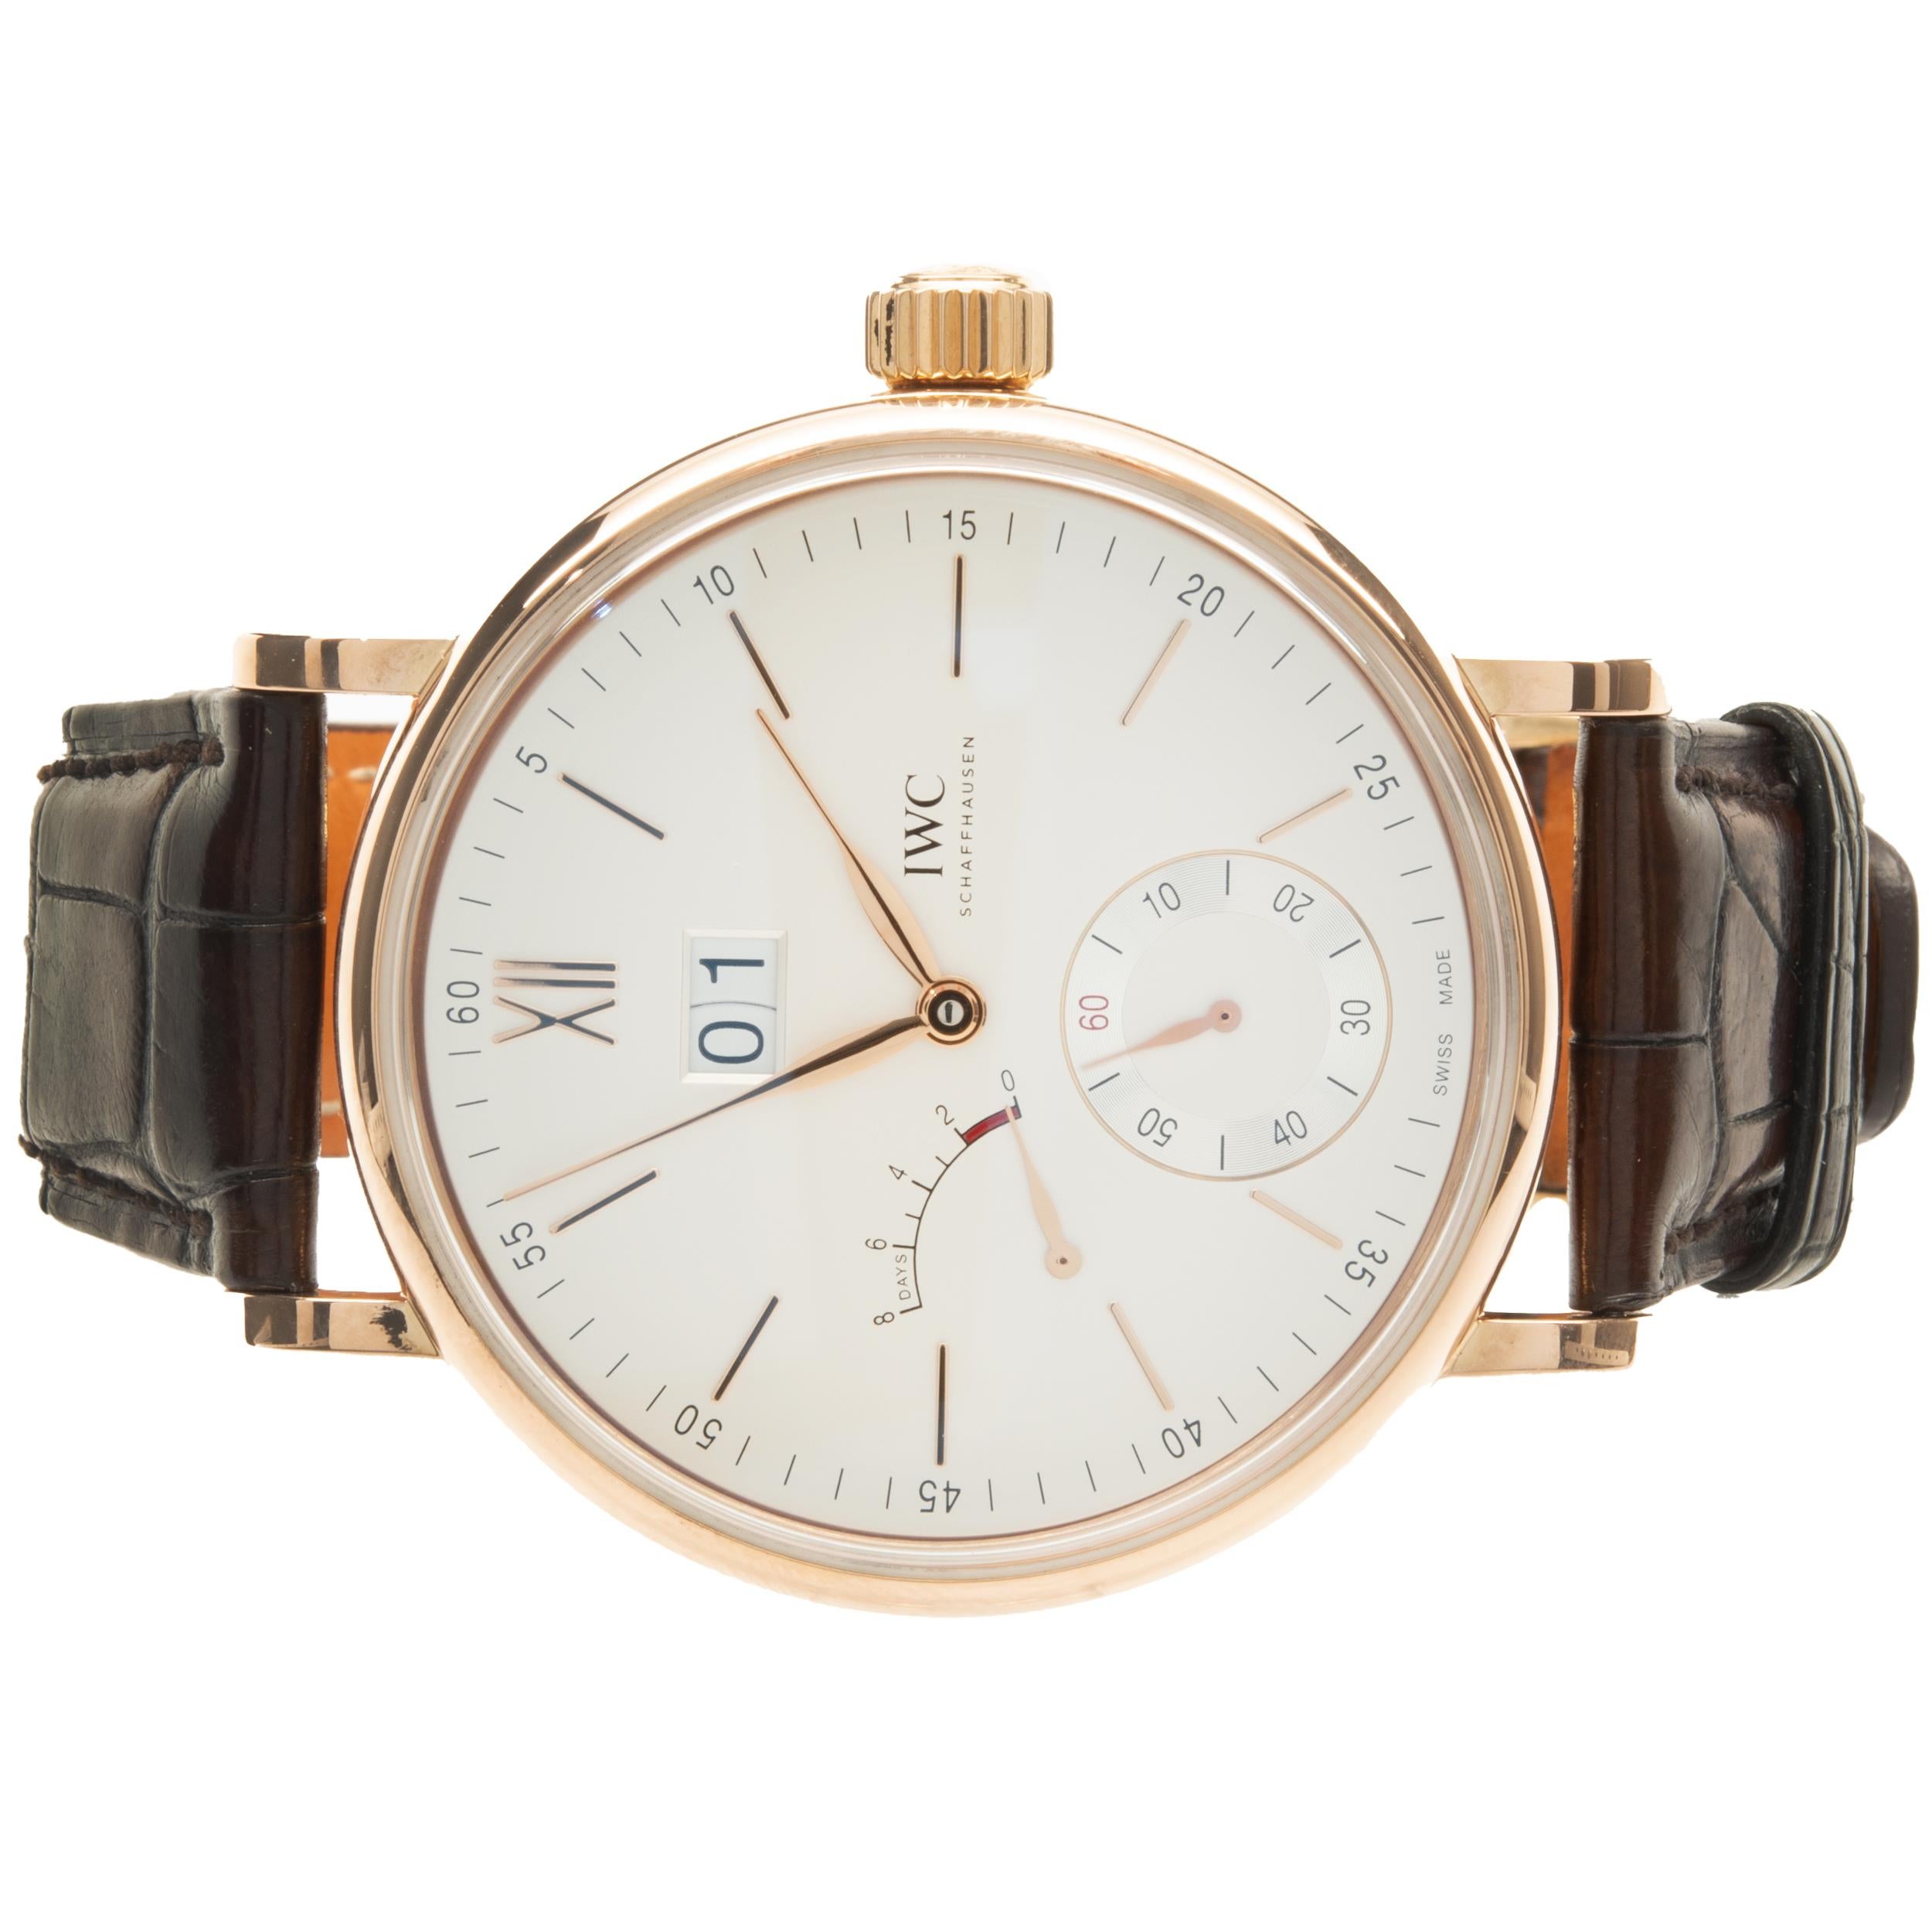 Brand: IWC
Movement: manual
Function: hour, minutes, seconds, date, 8-day power reserve
Case: 45mm 18K rose gold round case, sapphire crystal
Band: dark brown alligator leather strap by Santoni
Dial: silver stick
Reference #: IW5161
Serial #: